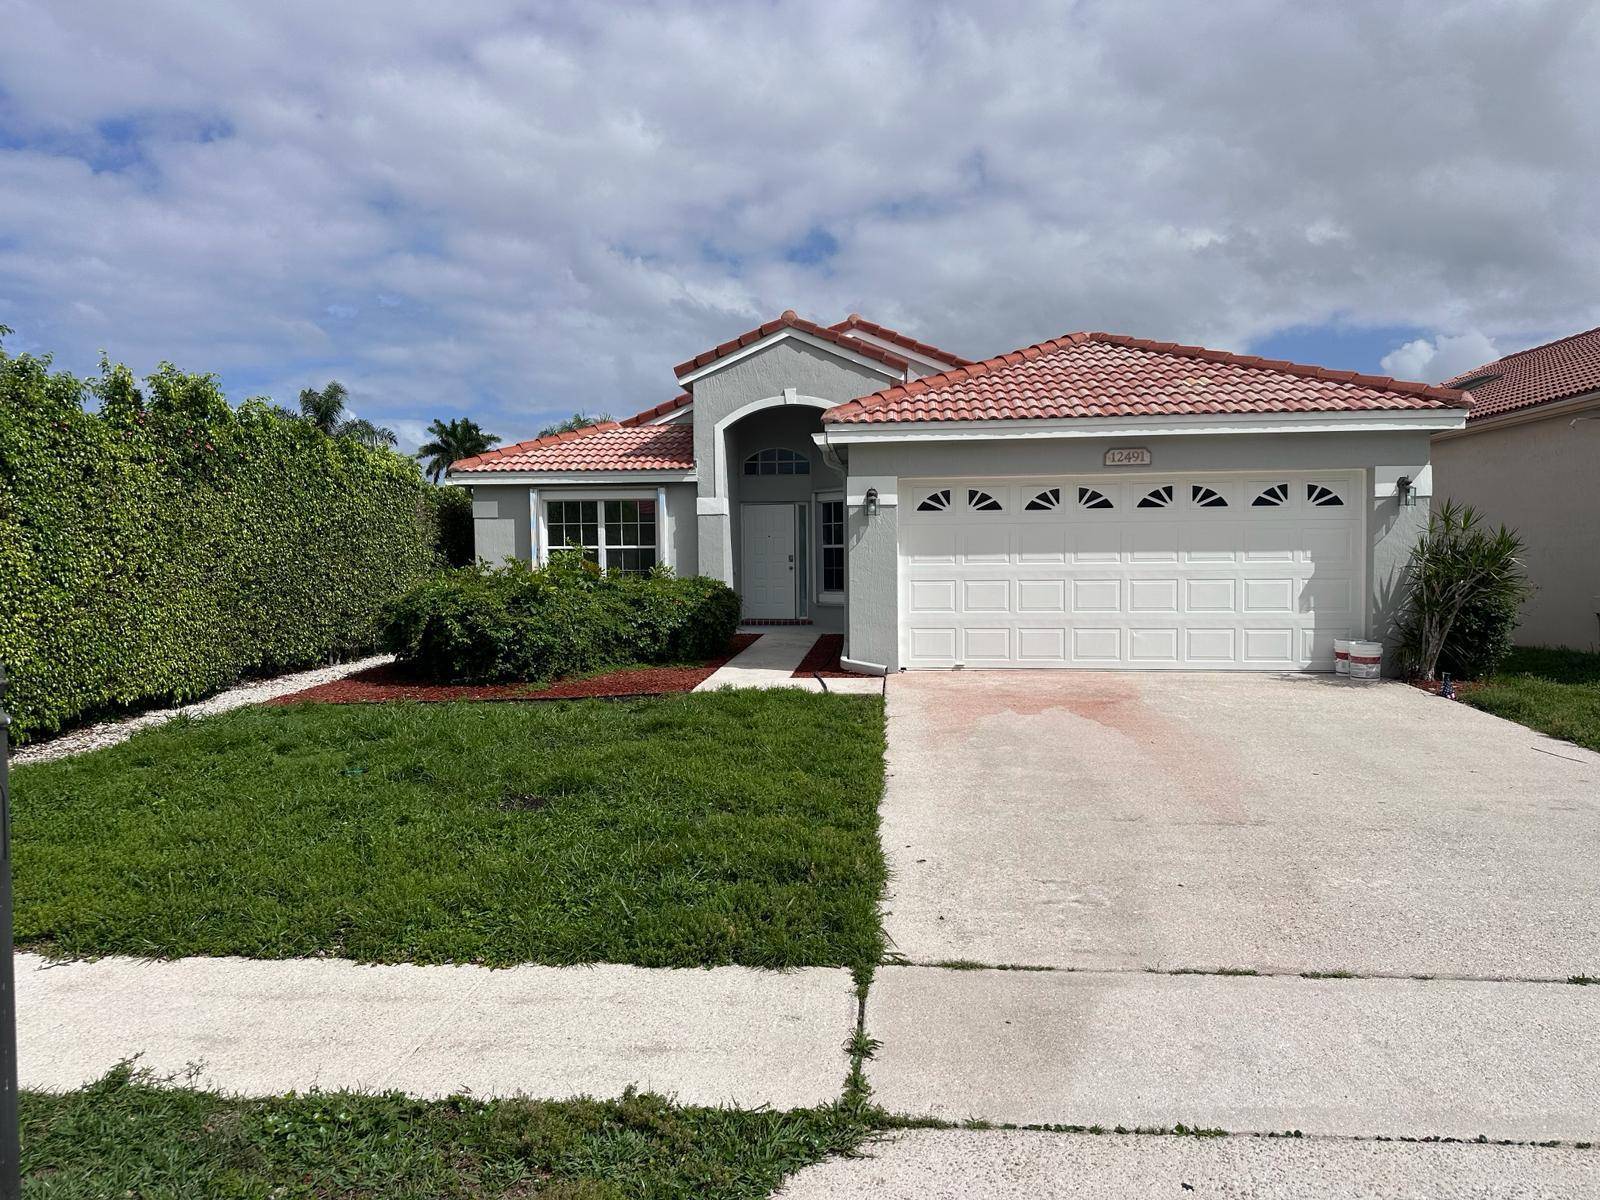 Discover the perfect blend of comfort and convenience in this fully renovated 3 bedroom, 2 bathroom gem nestled in the peaceful Starlight Cove community of Boynton Beach, Florida.